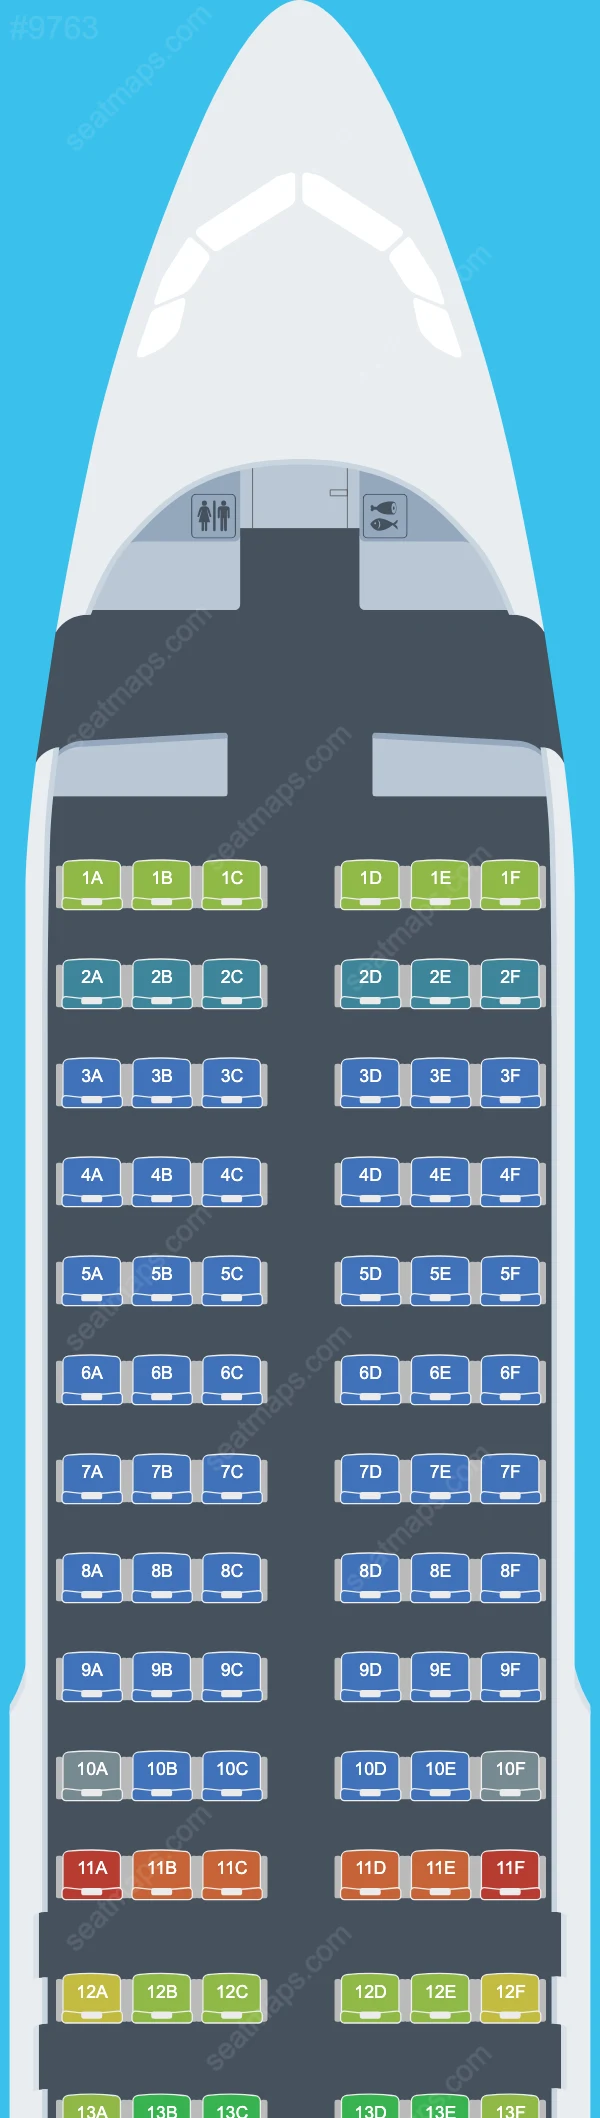 Spring Airlines Airbus A320 Seat Maps A320-200neo